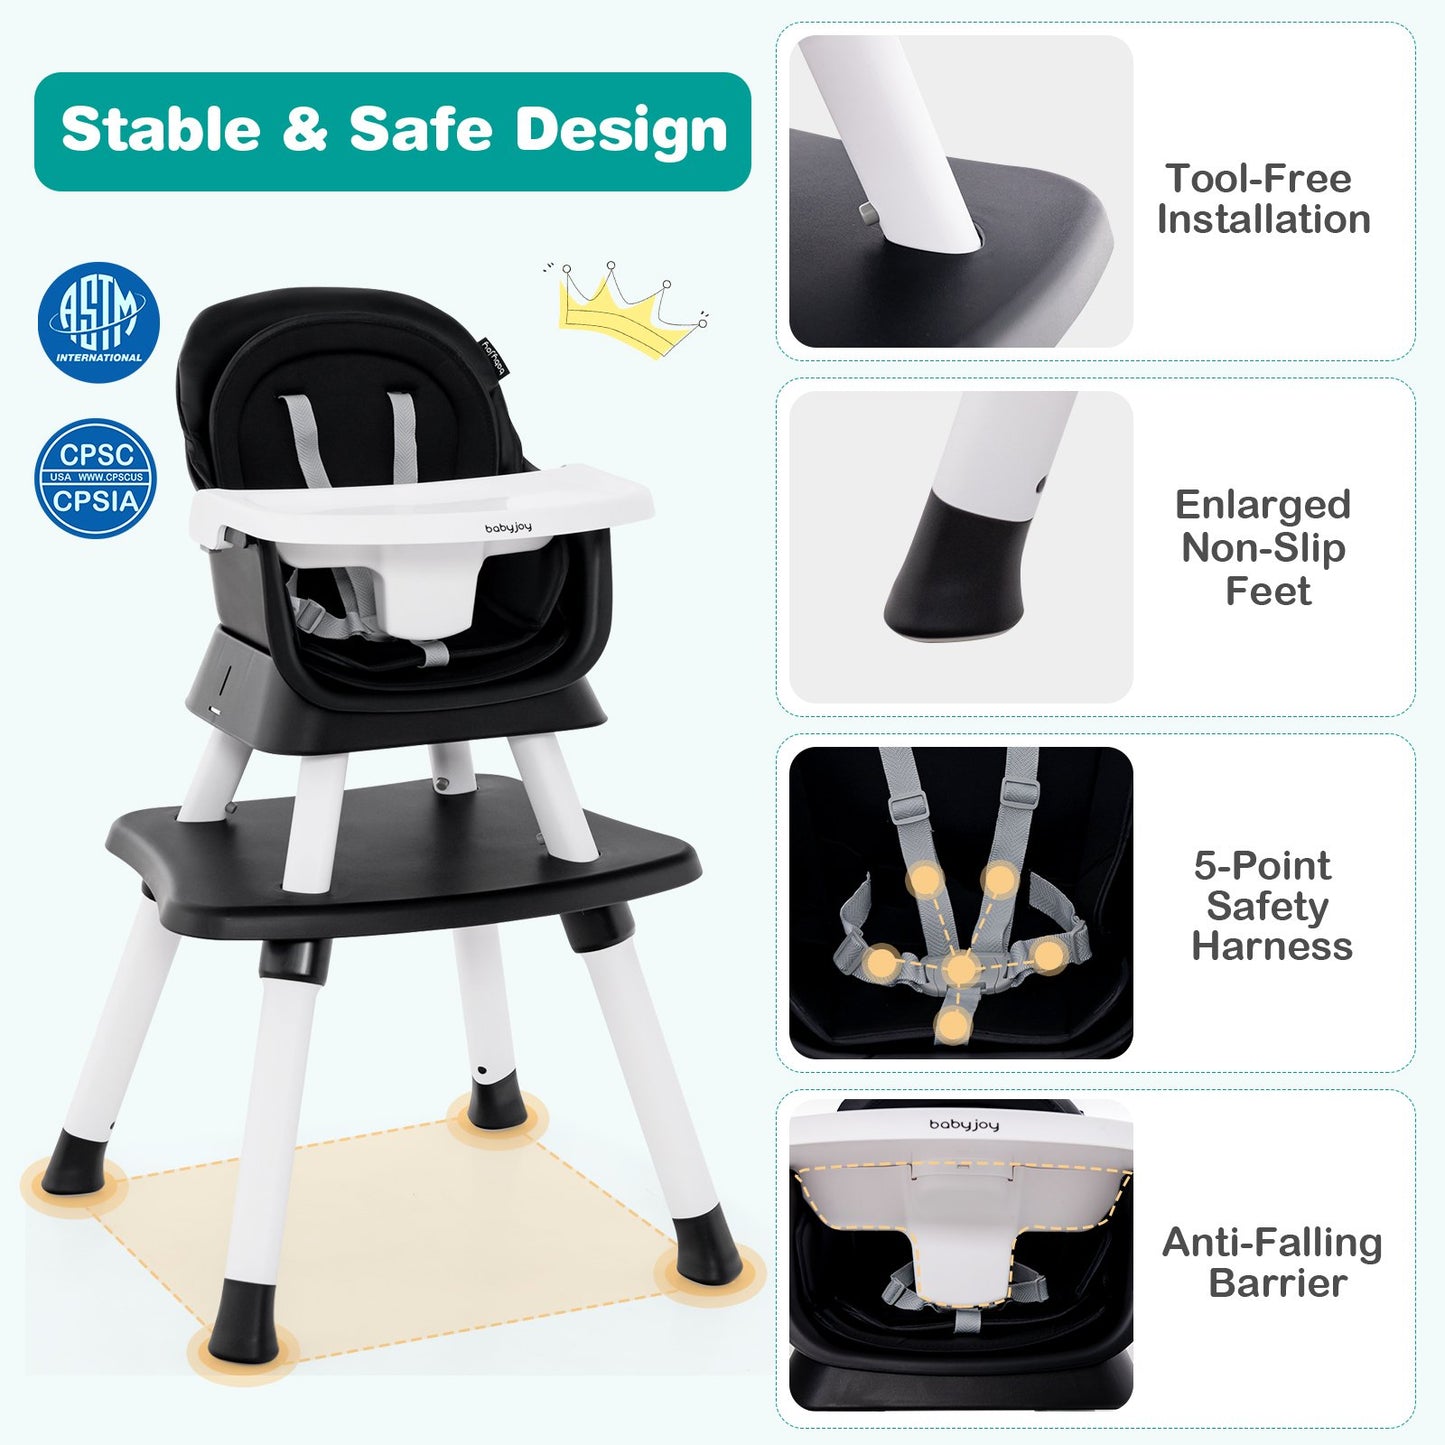 6-in-1 Convertible Baby High Chair with Adjustable Removable Tray, Black